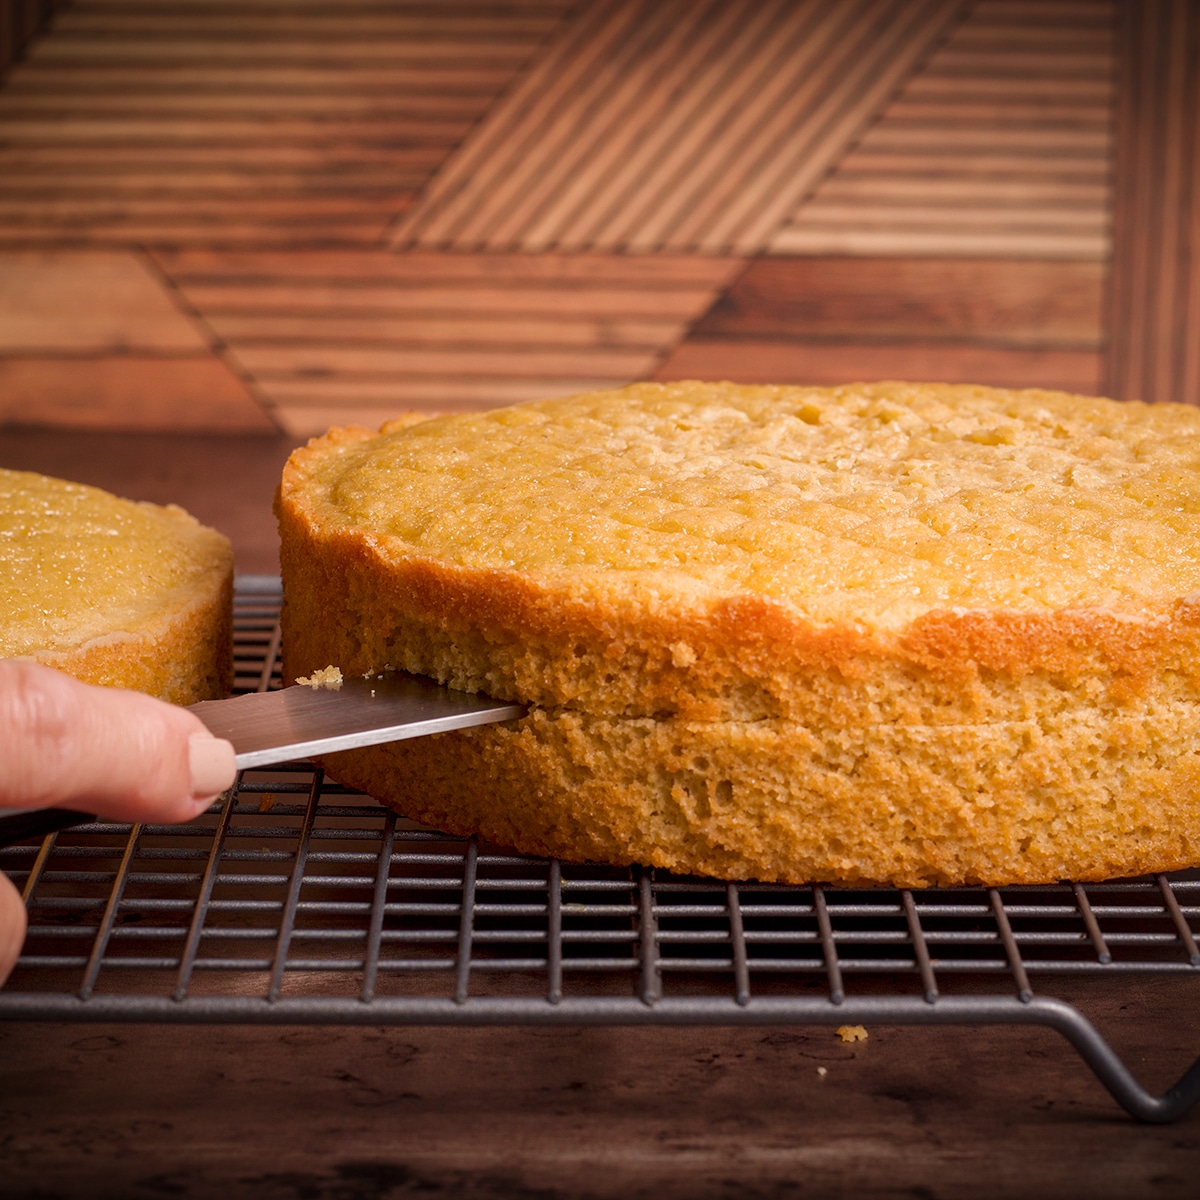 Using a serrated knife to cut a layer of orange olive oil cake in half lengthwise.